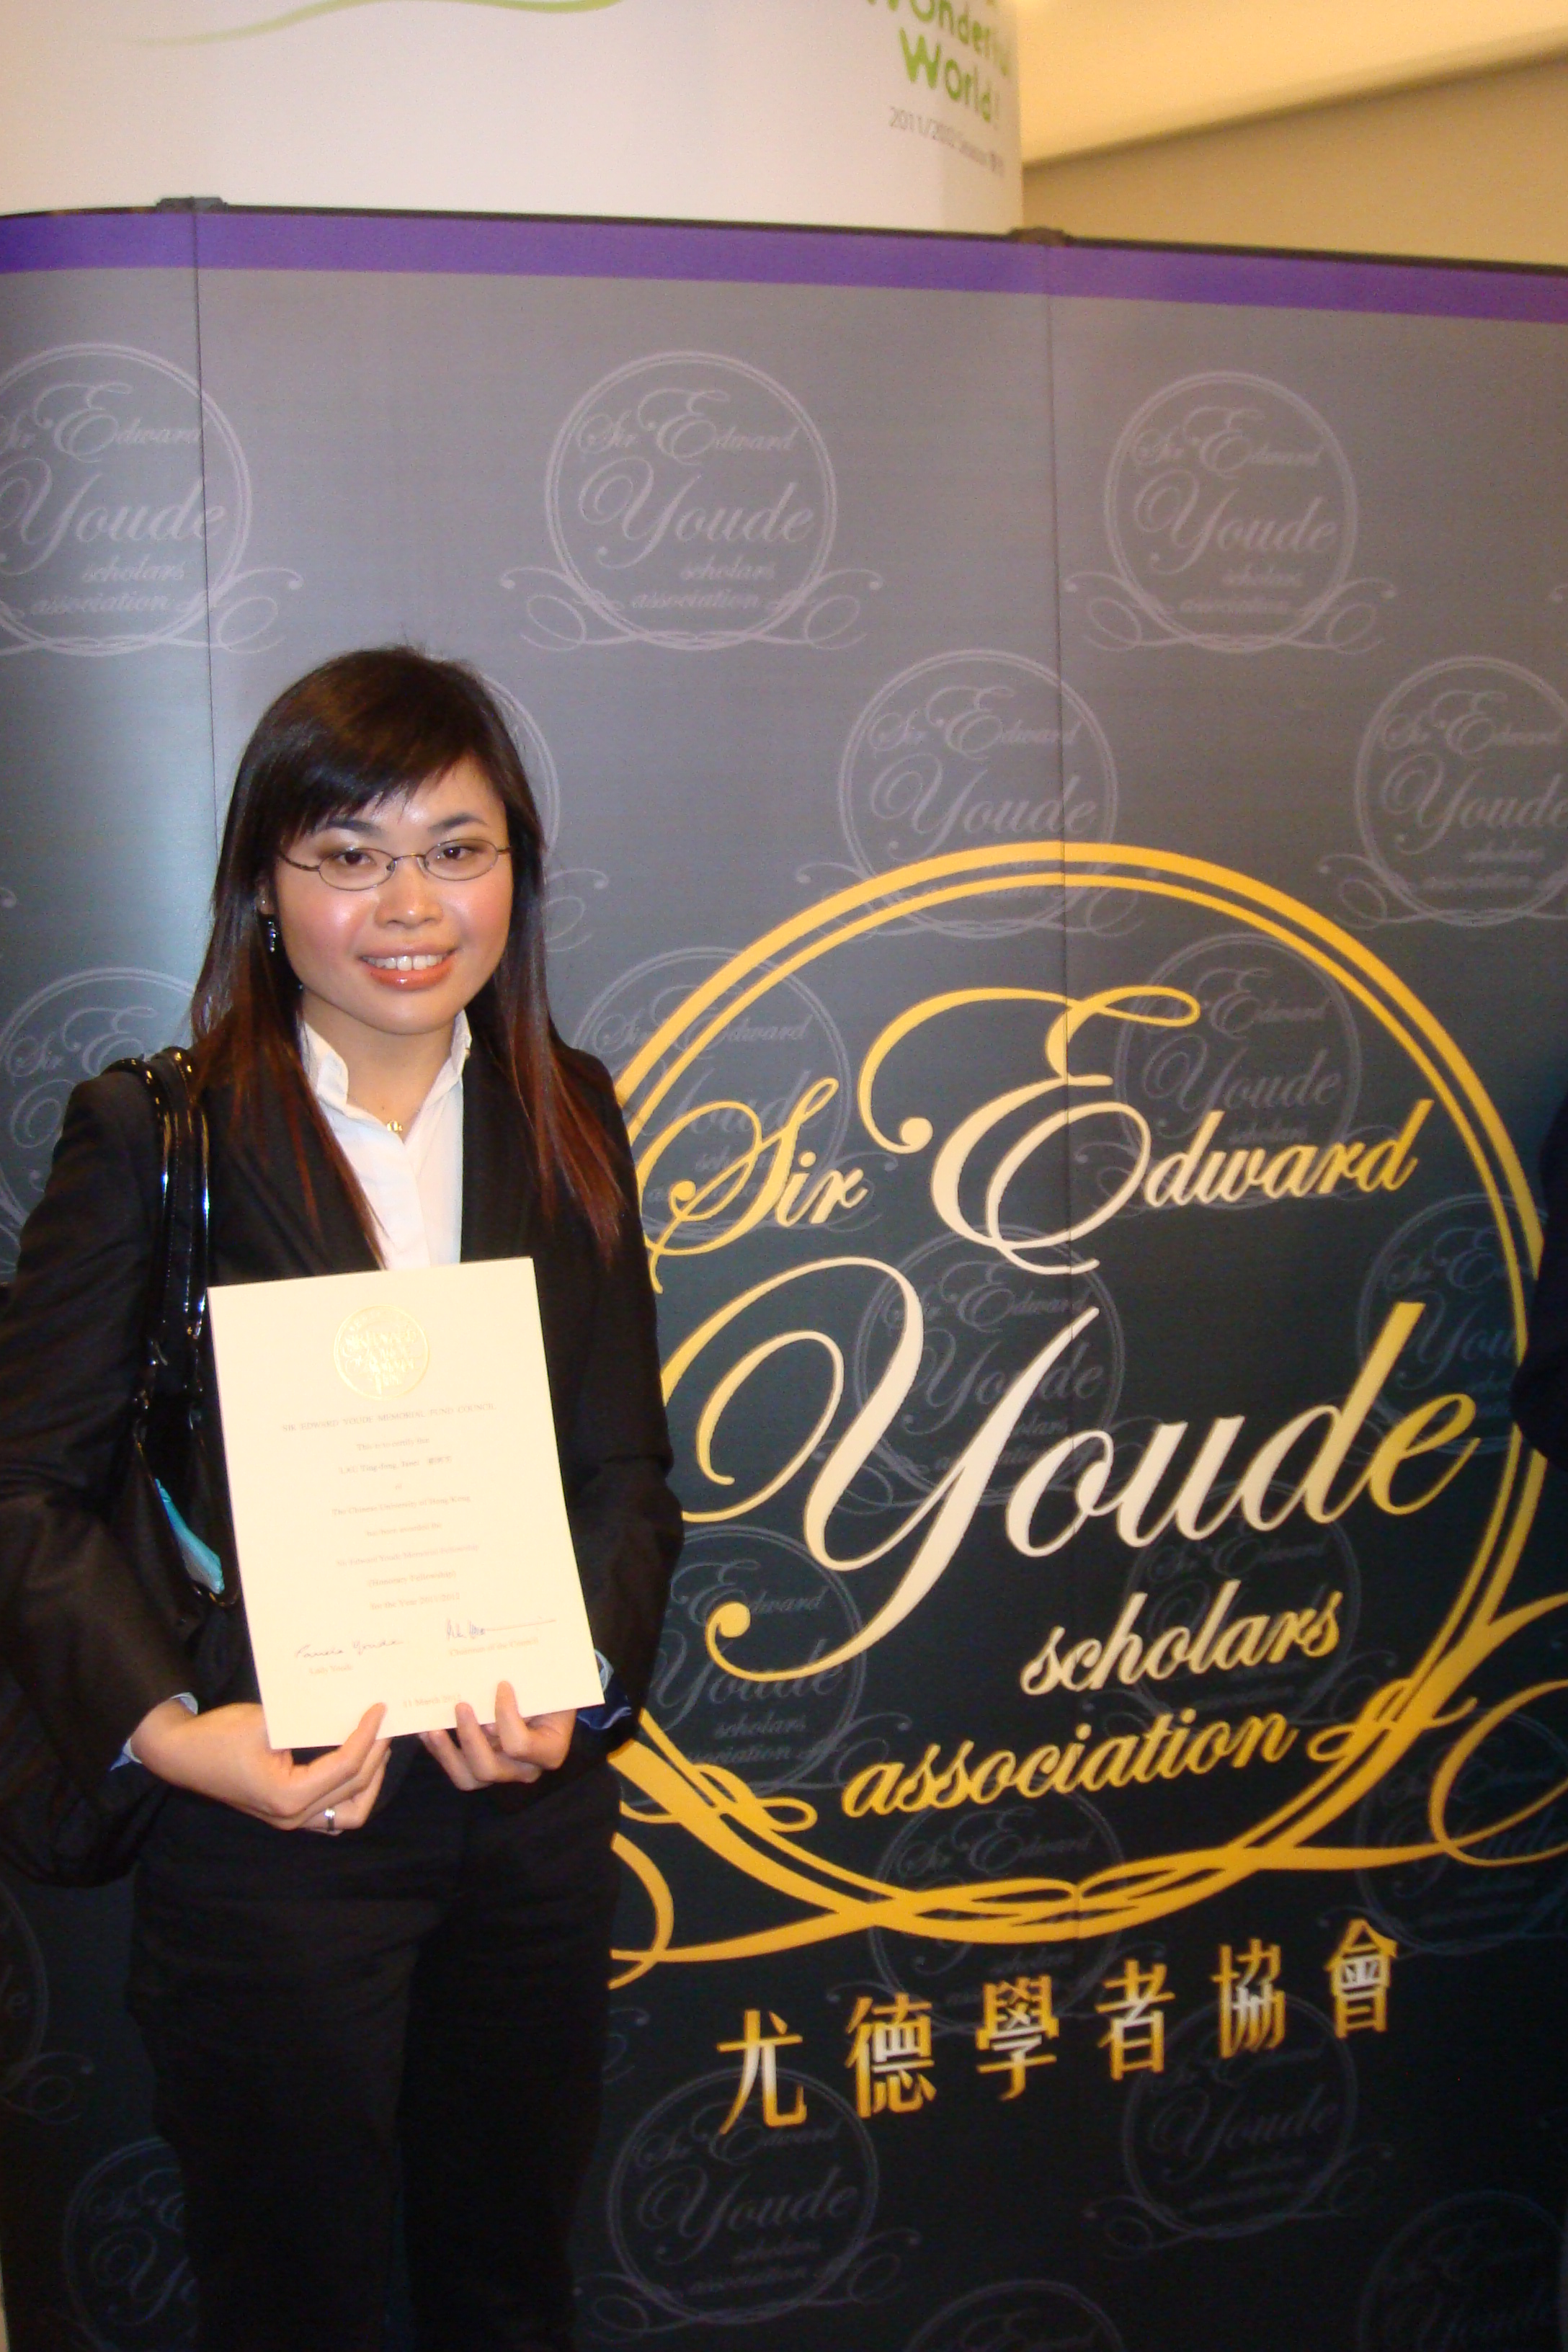 another photo of Ms. Janet Lau Ting Fong and her award certificate